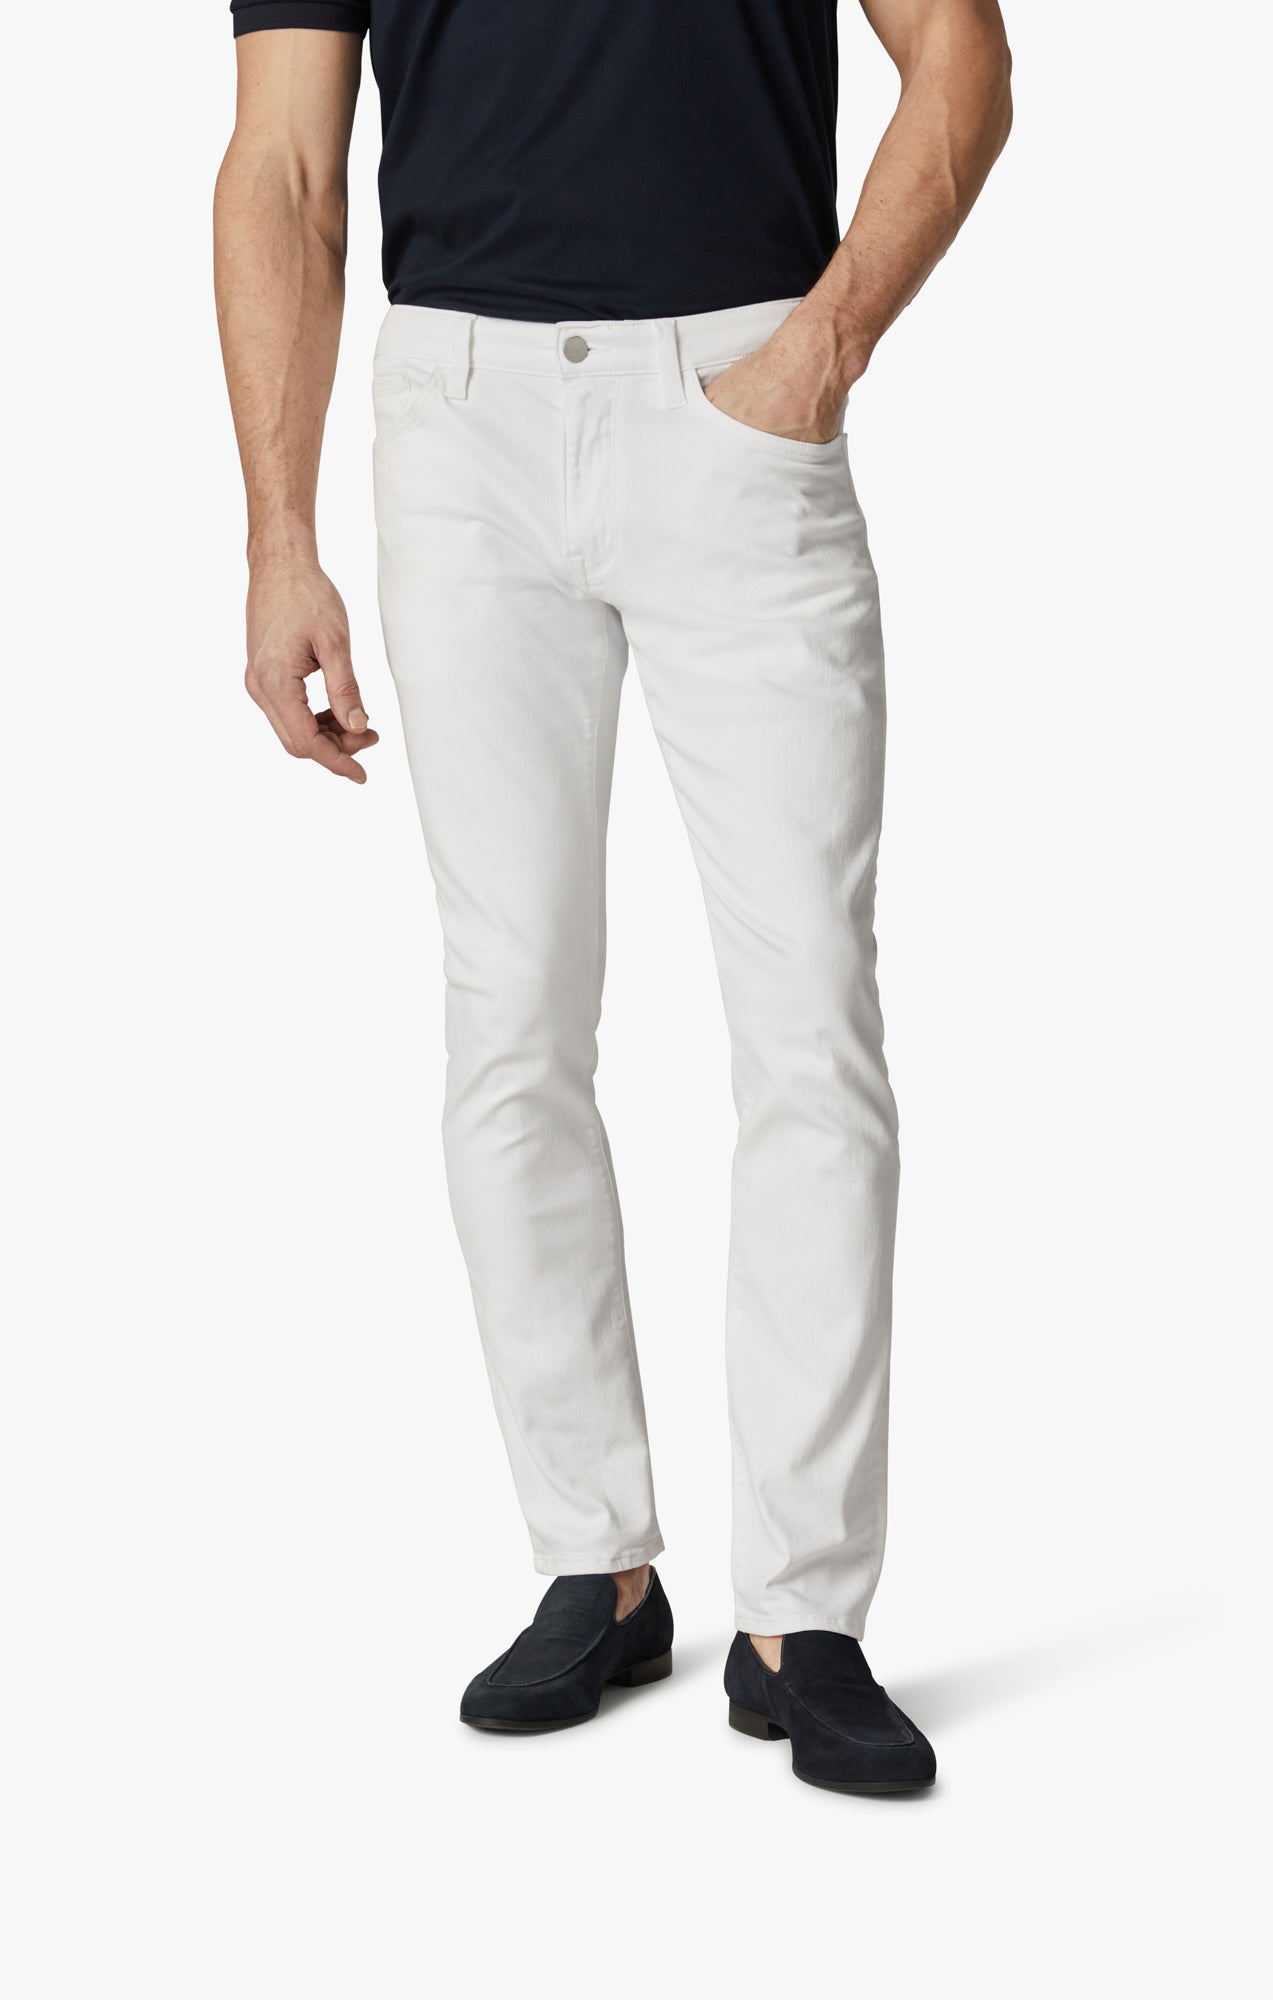 Cool Slim Leg Pants In Double White Comfort Image 4